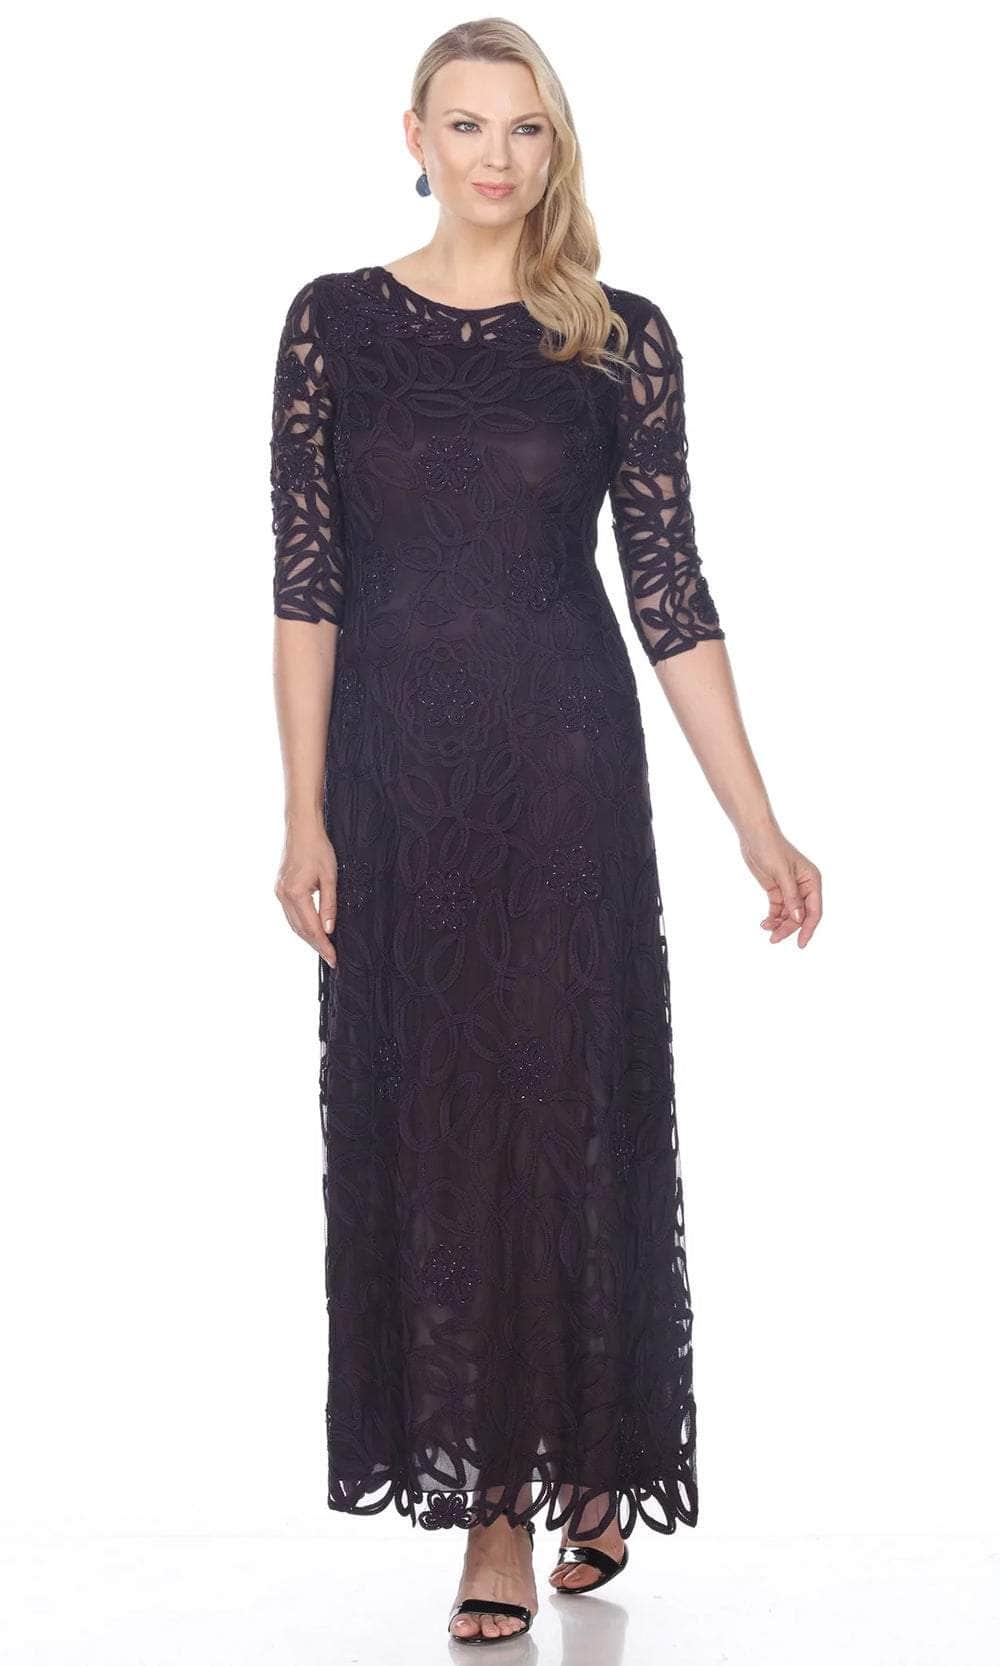 Soulmates 1616 - Soutache Embroidered Lace Evening Gown Dress